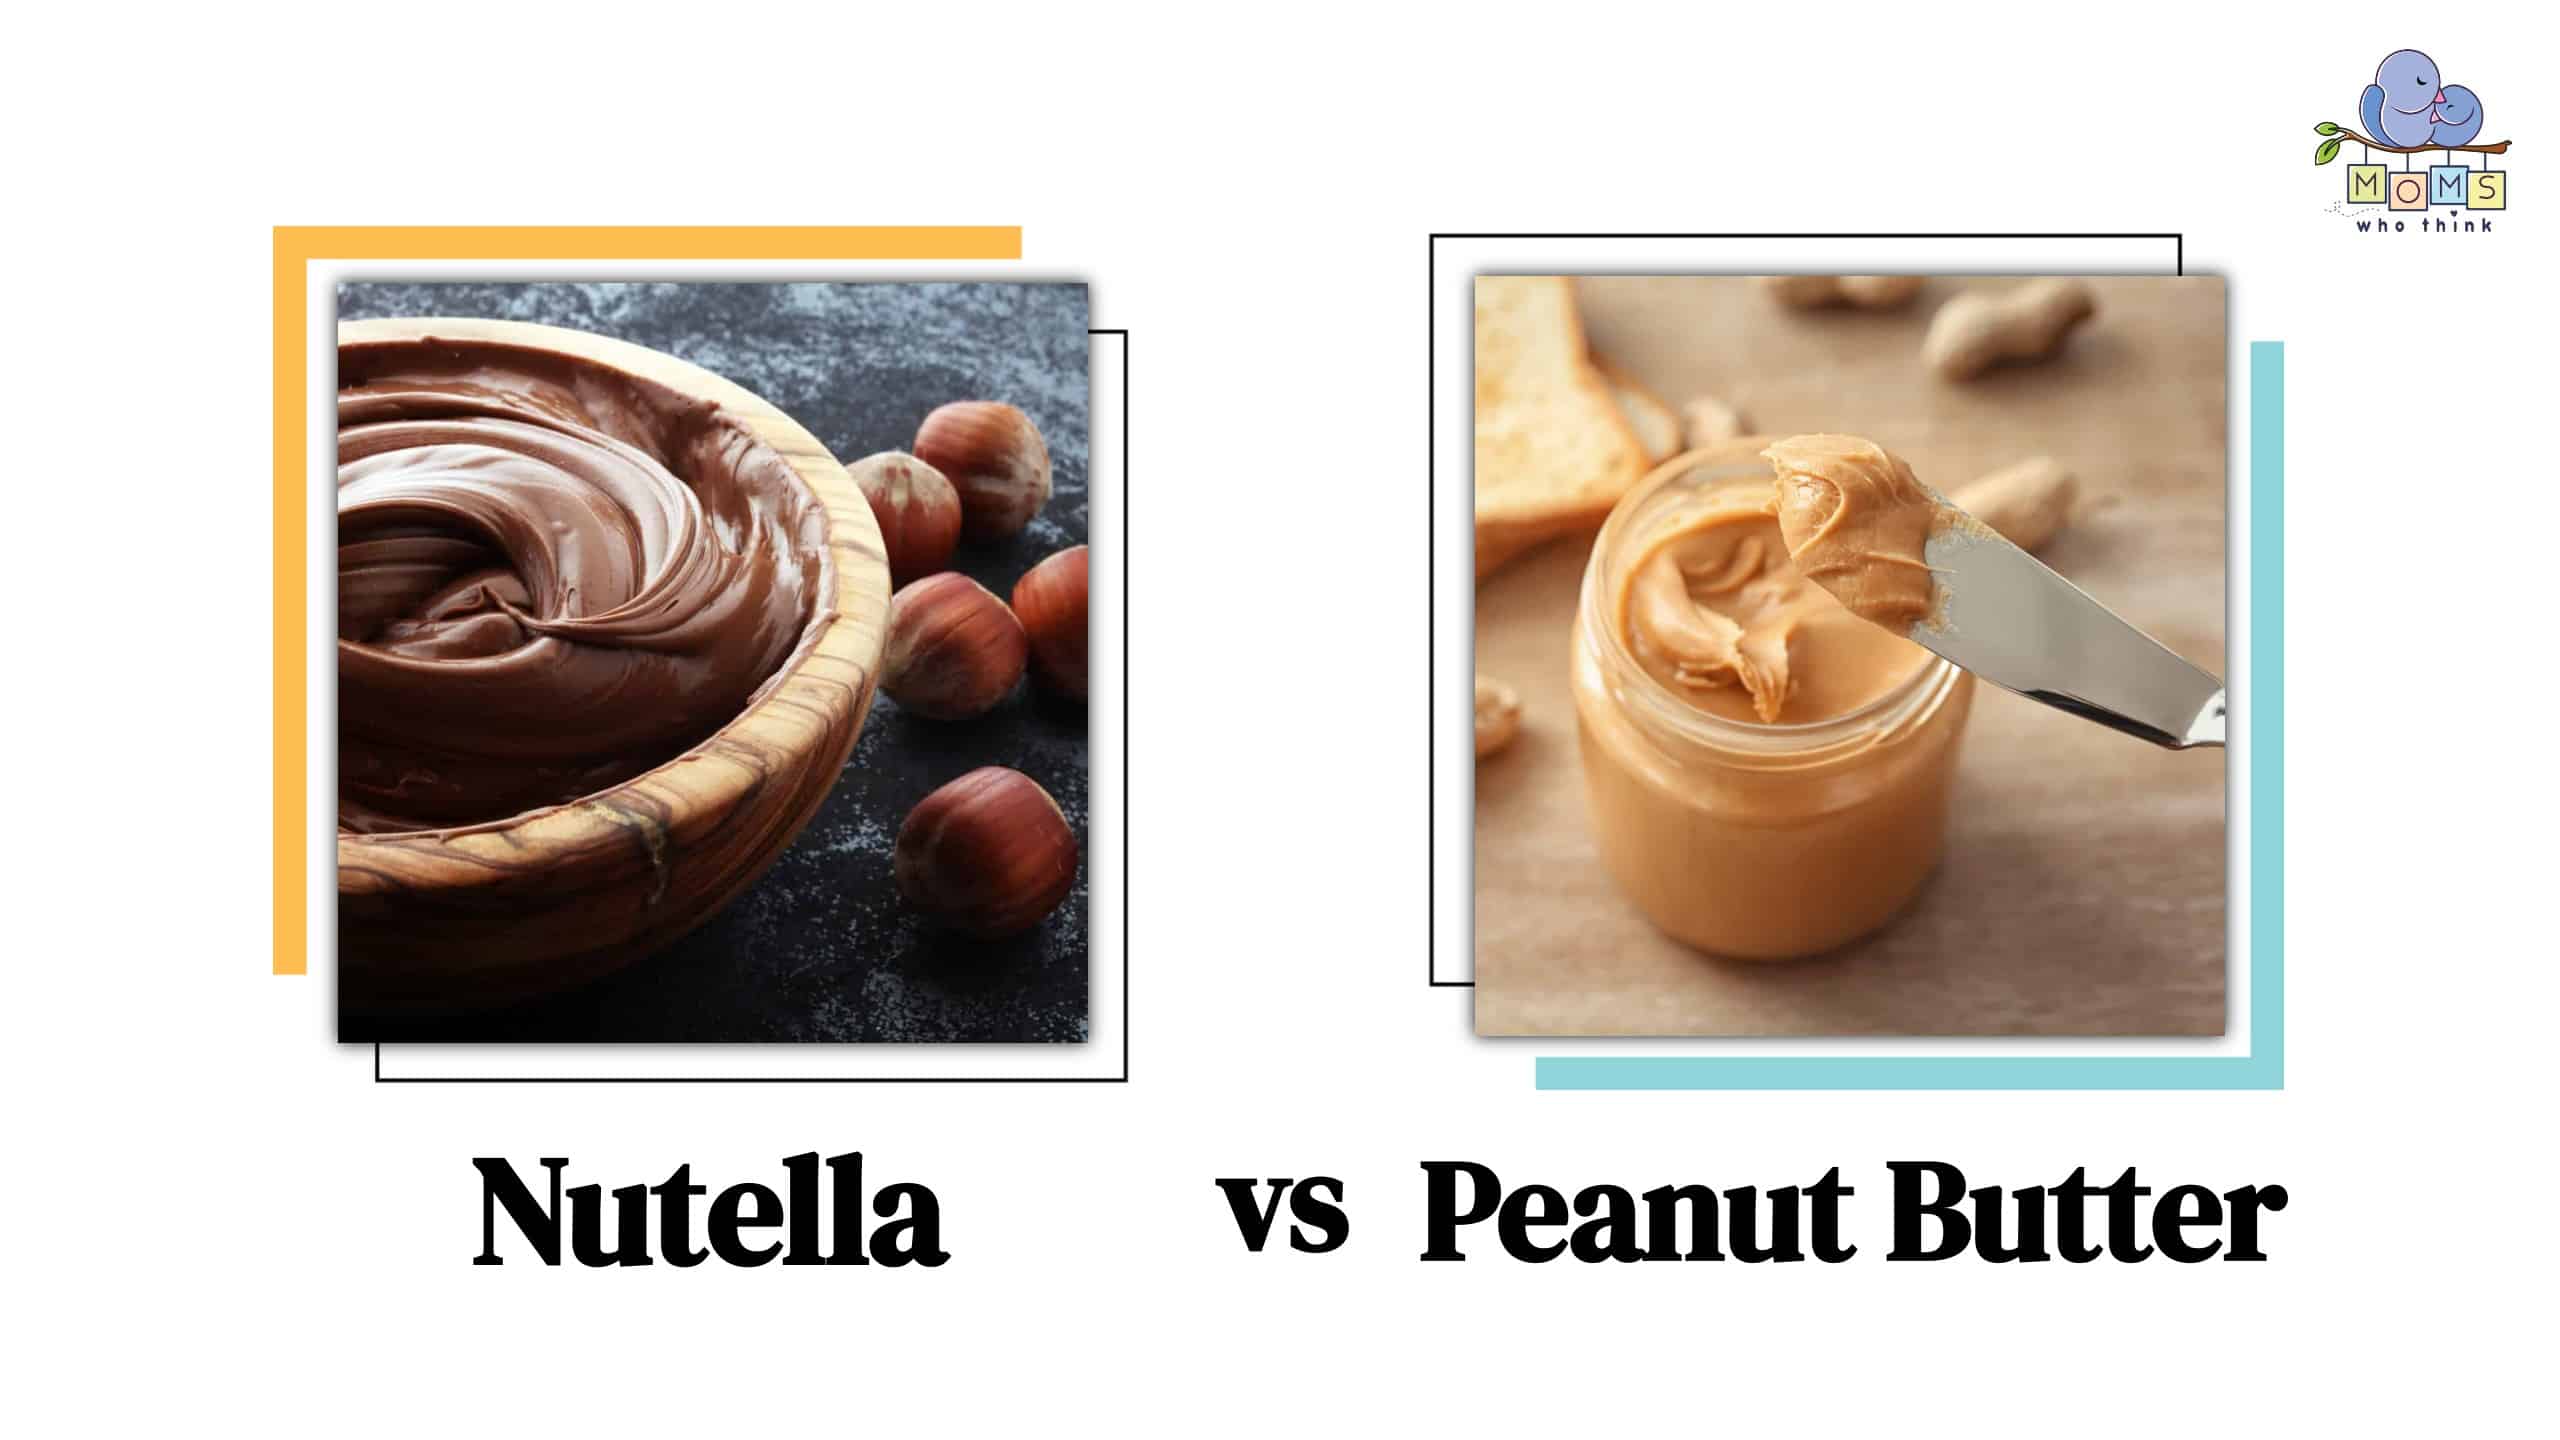 Nutella with Peanuts